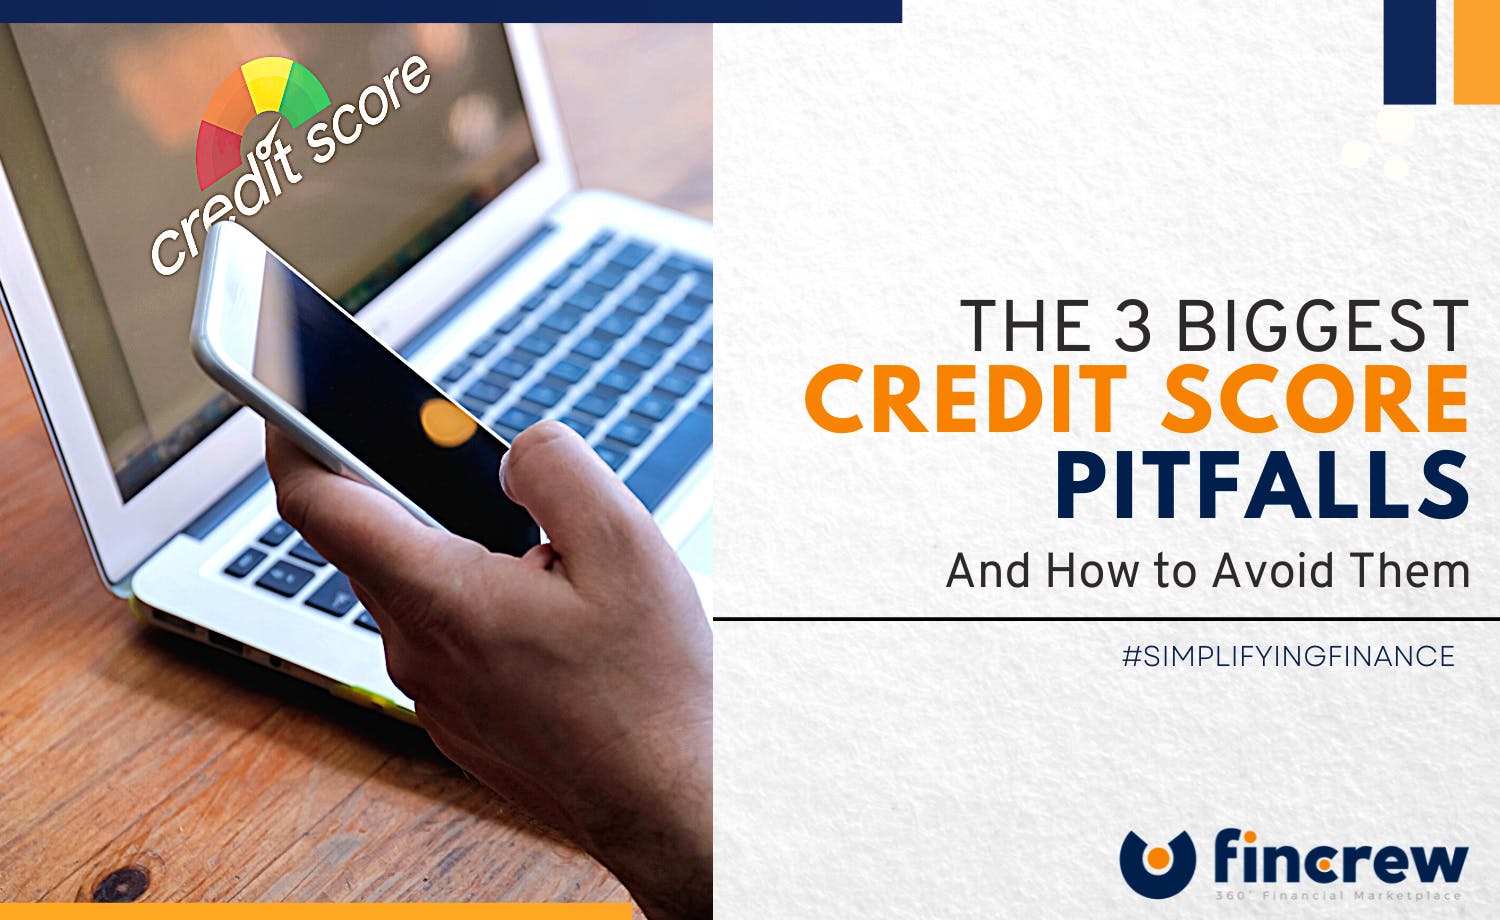 3 Biggest Credit Score Pitfalls And How to Avoid Them